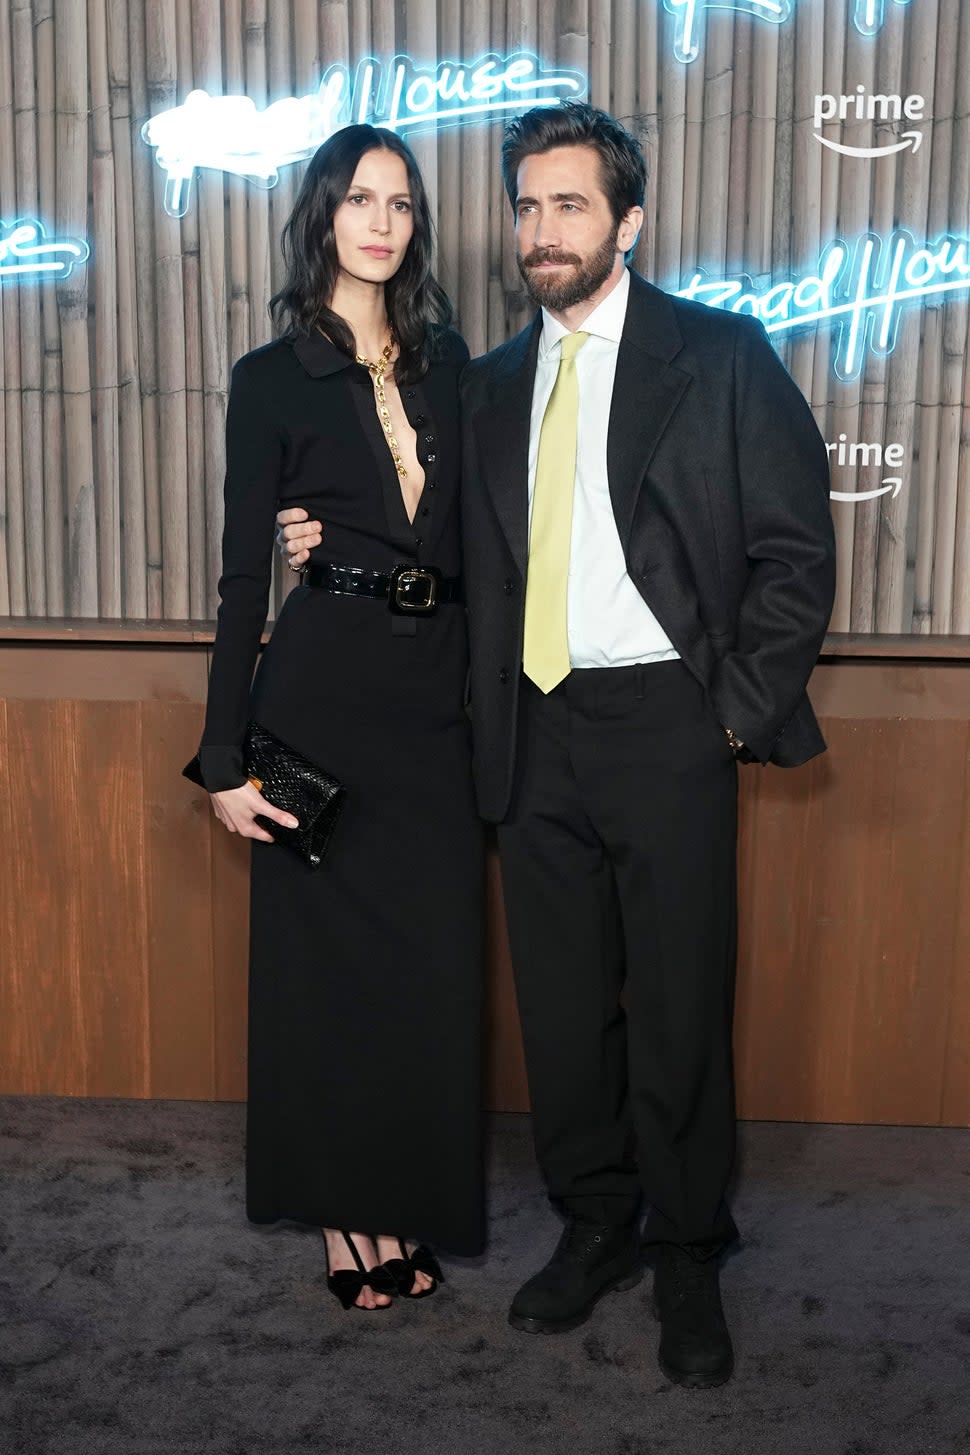 Jake Gyllenhaal and Jeanne Cadieu attend the premiere of Road House